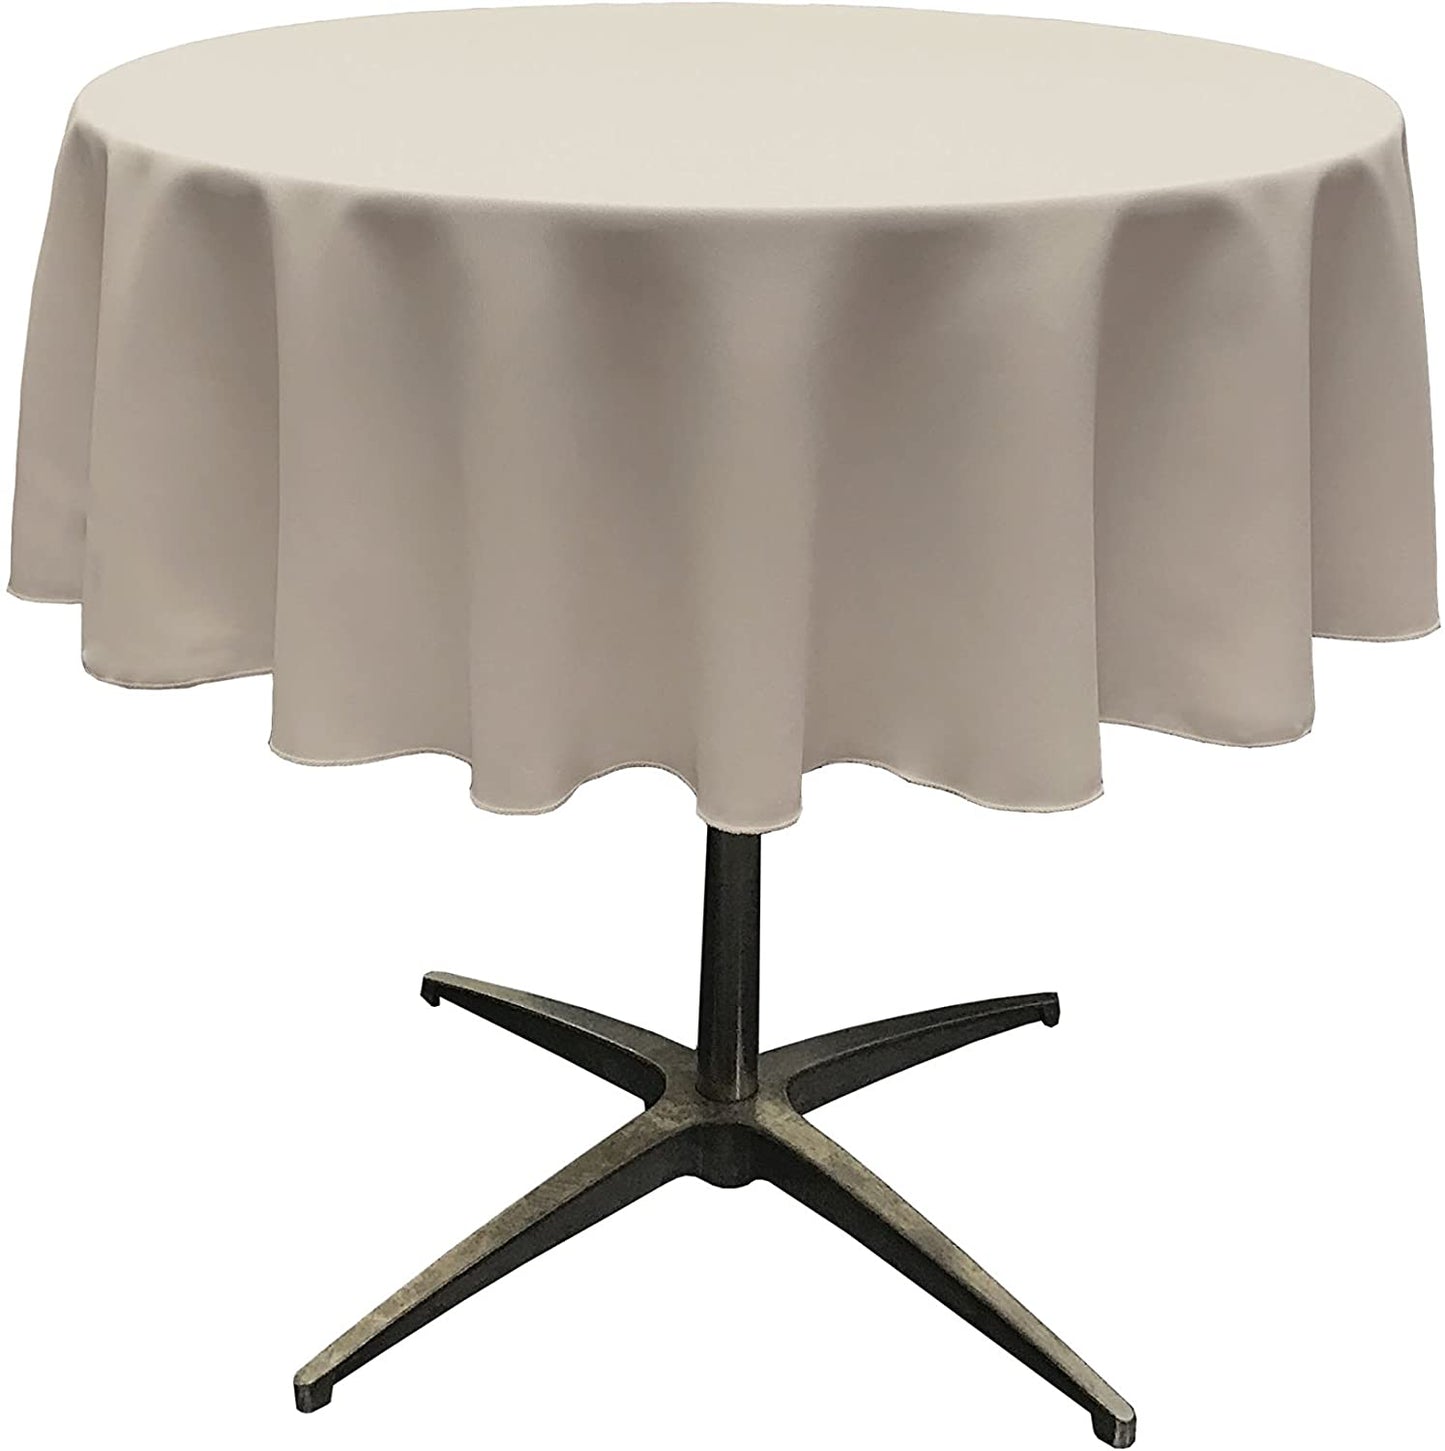 Polyester Poplin Washable Round Tablecloth, Stain and Wrinkle Resistant Table Cover Silver